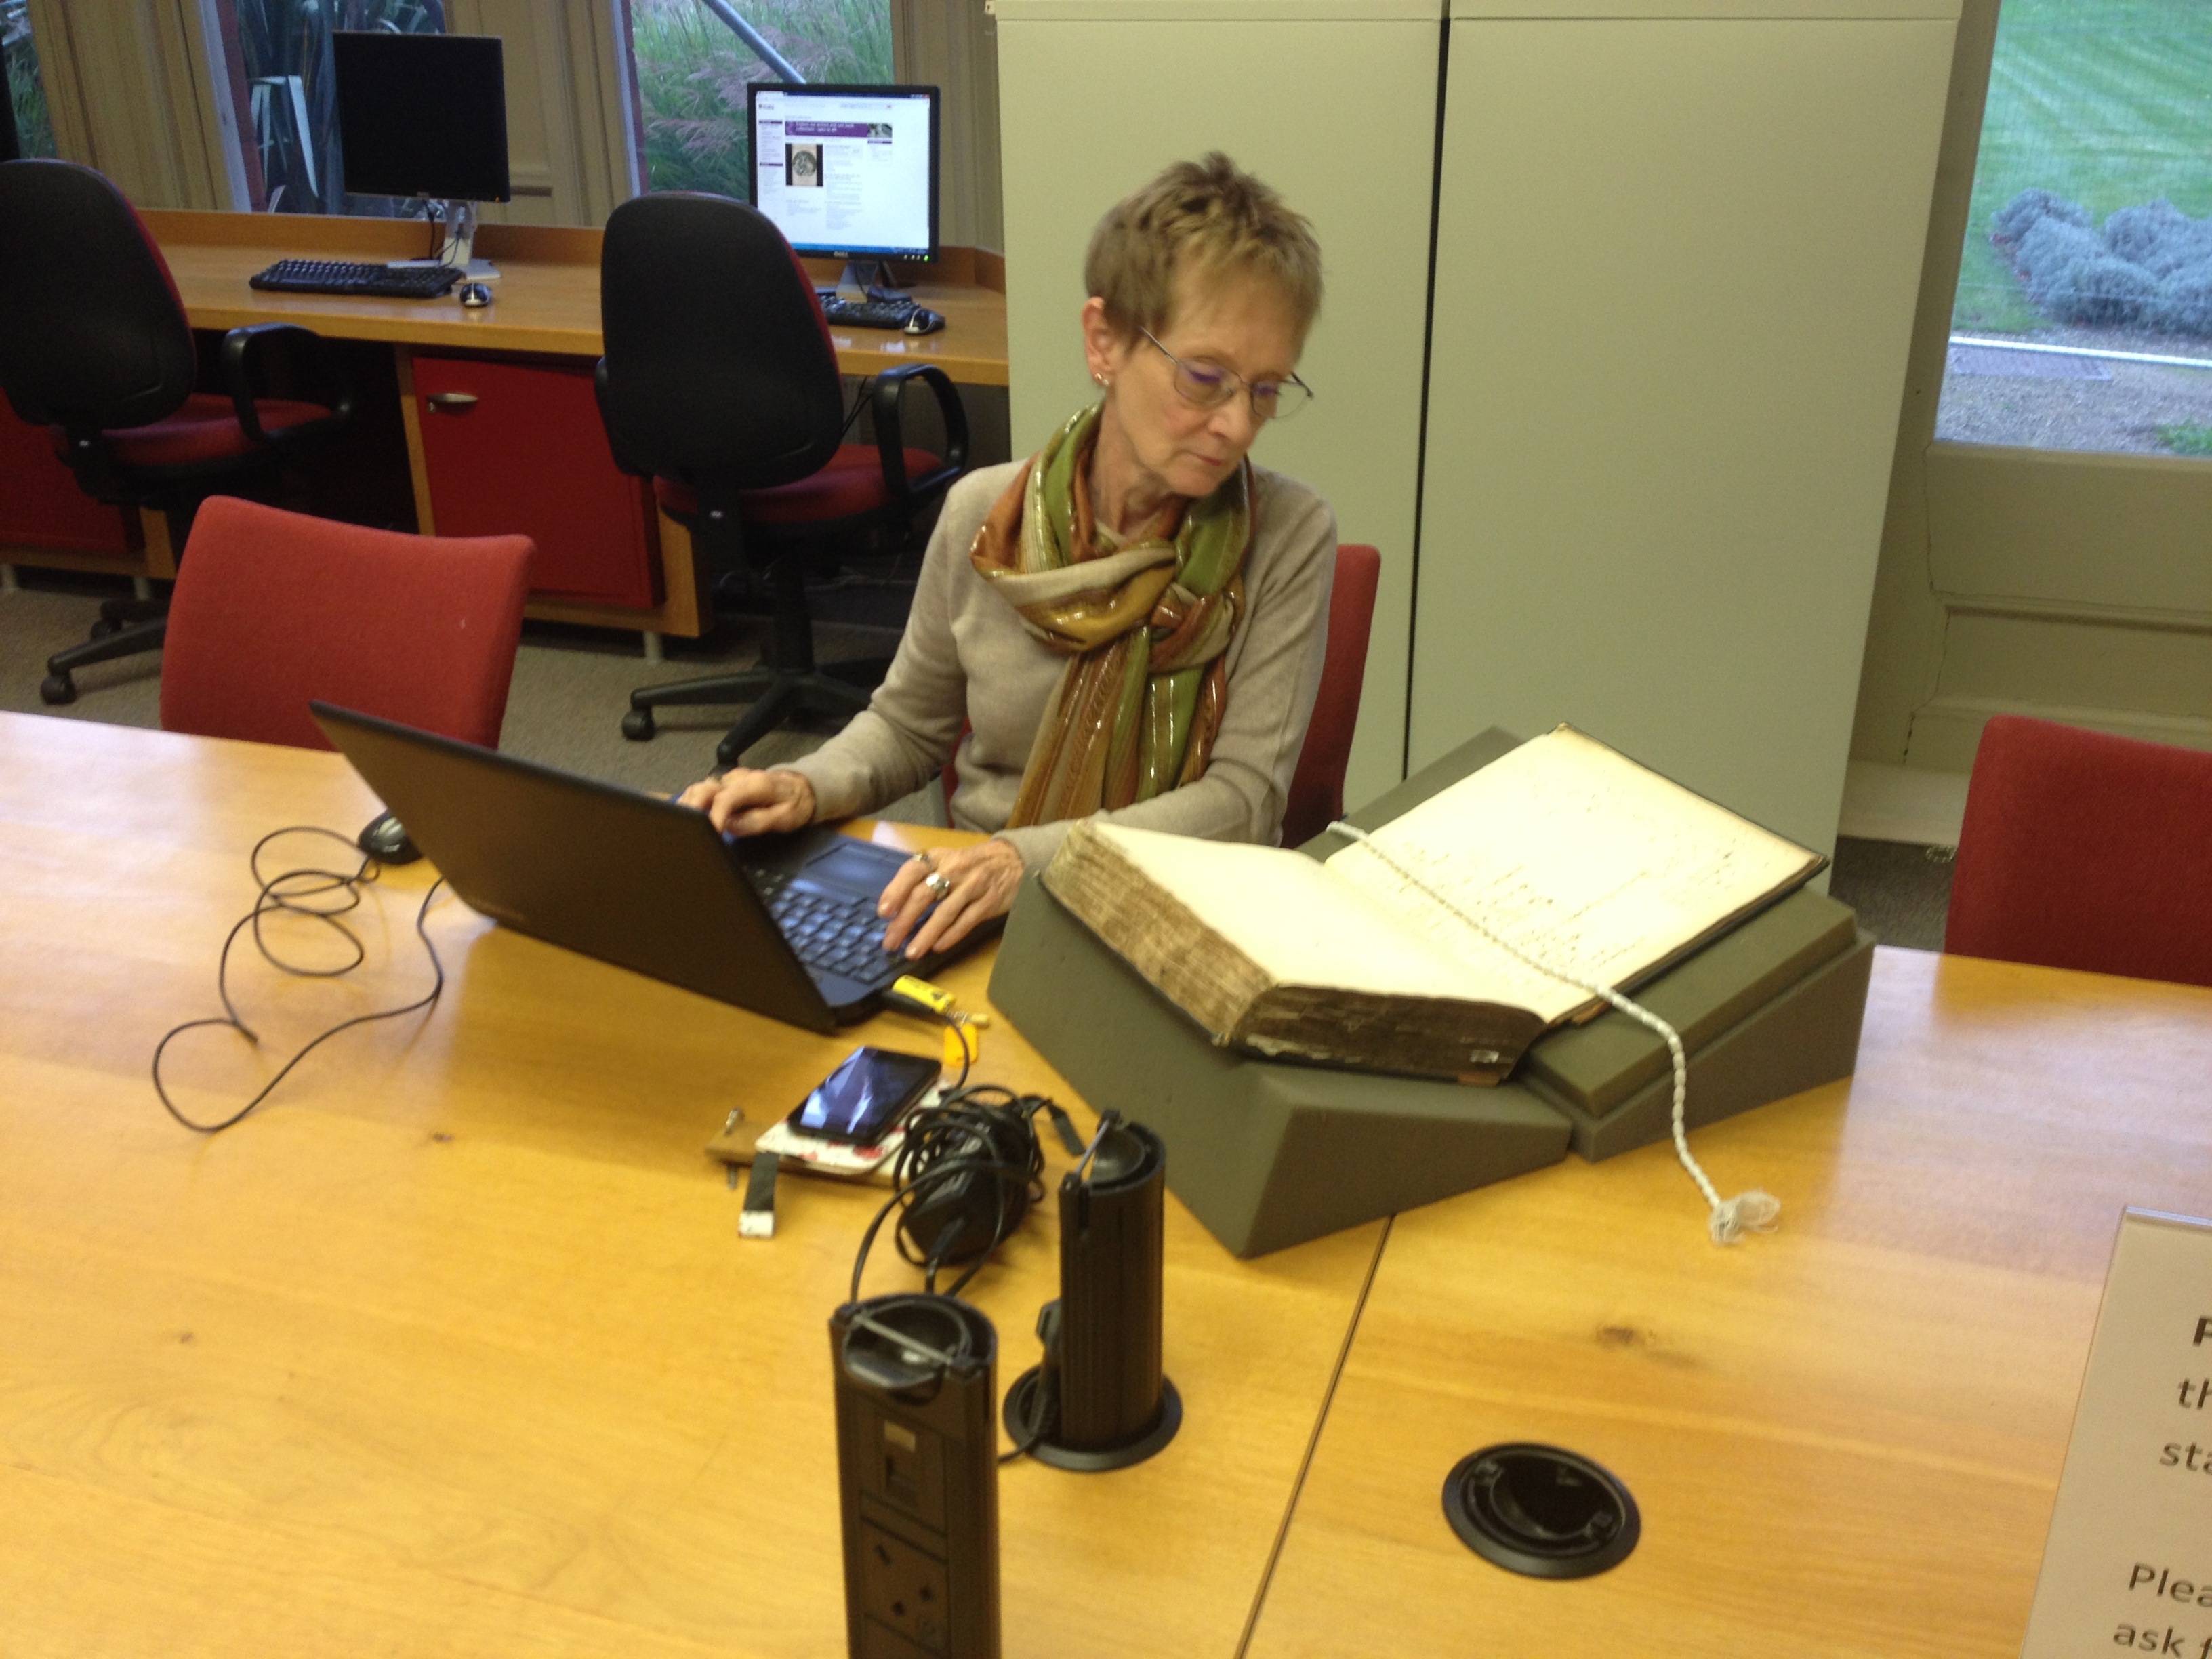 Jenny recording details from one of the many Chatto & Windus letter books.